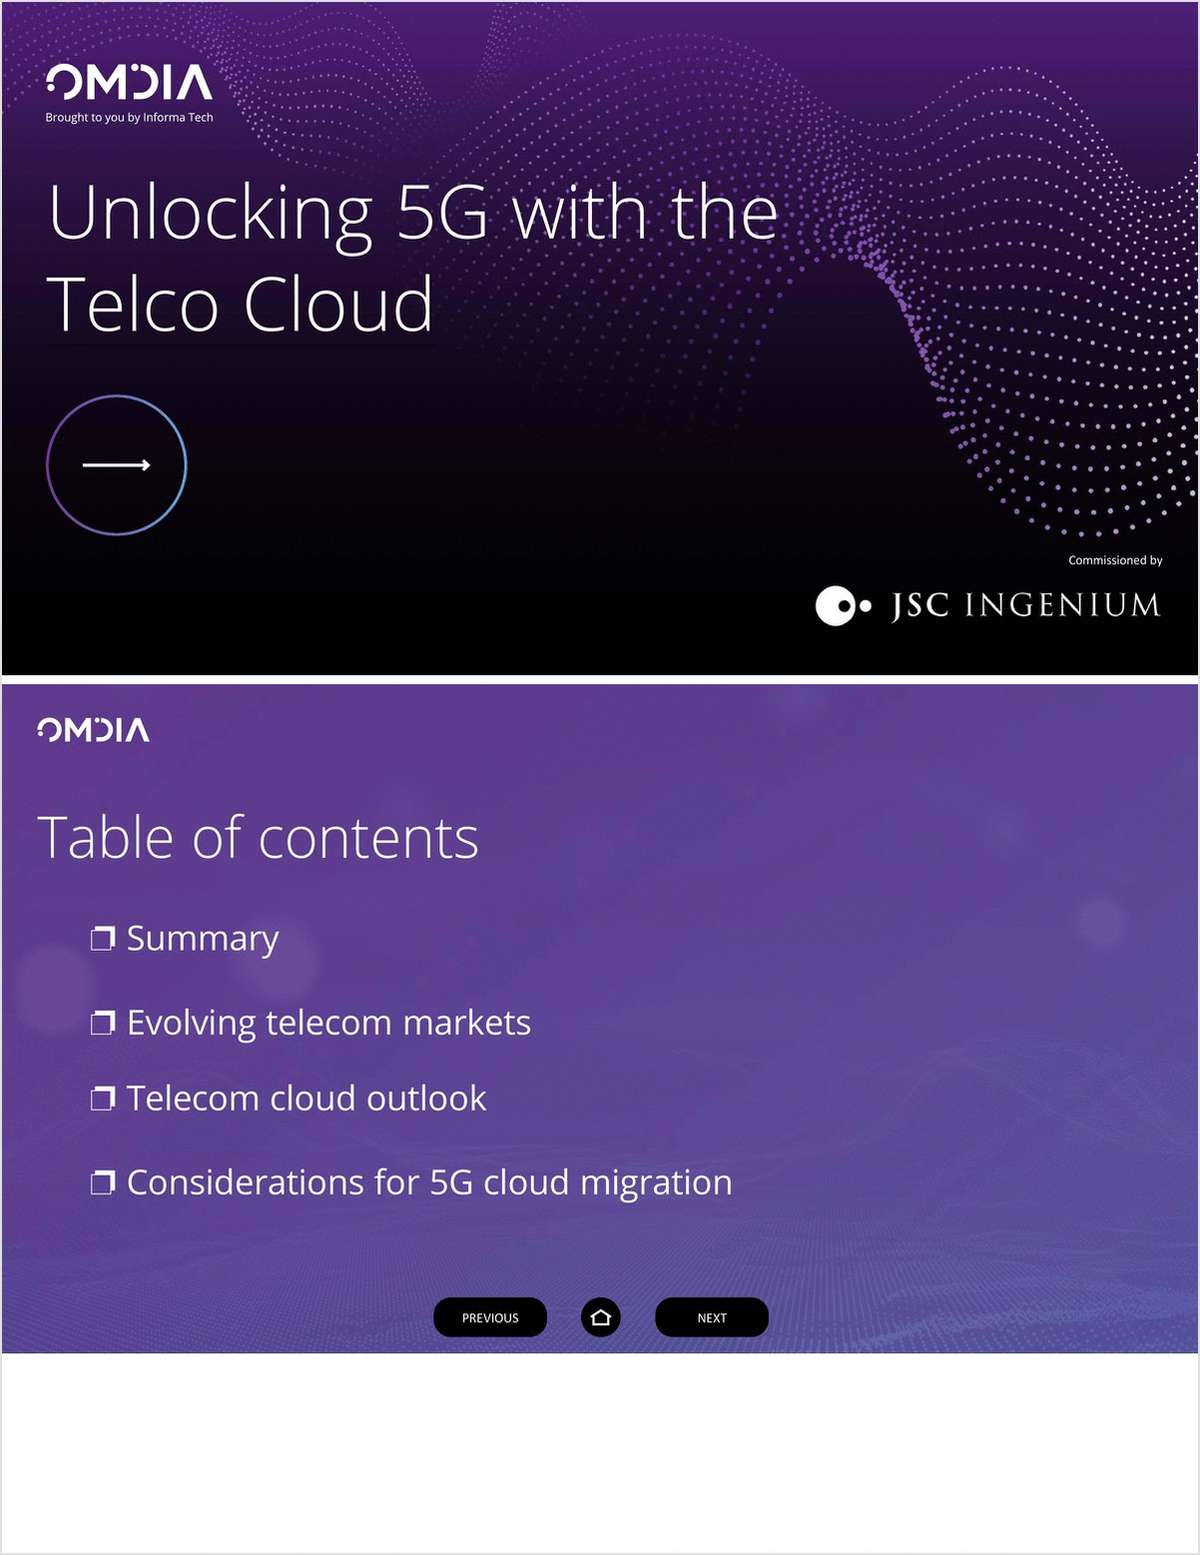 Unlocking 5G with Telco Cloud